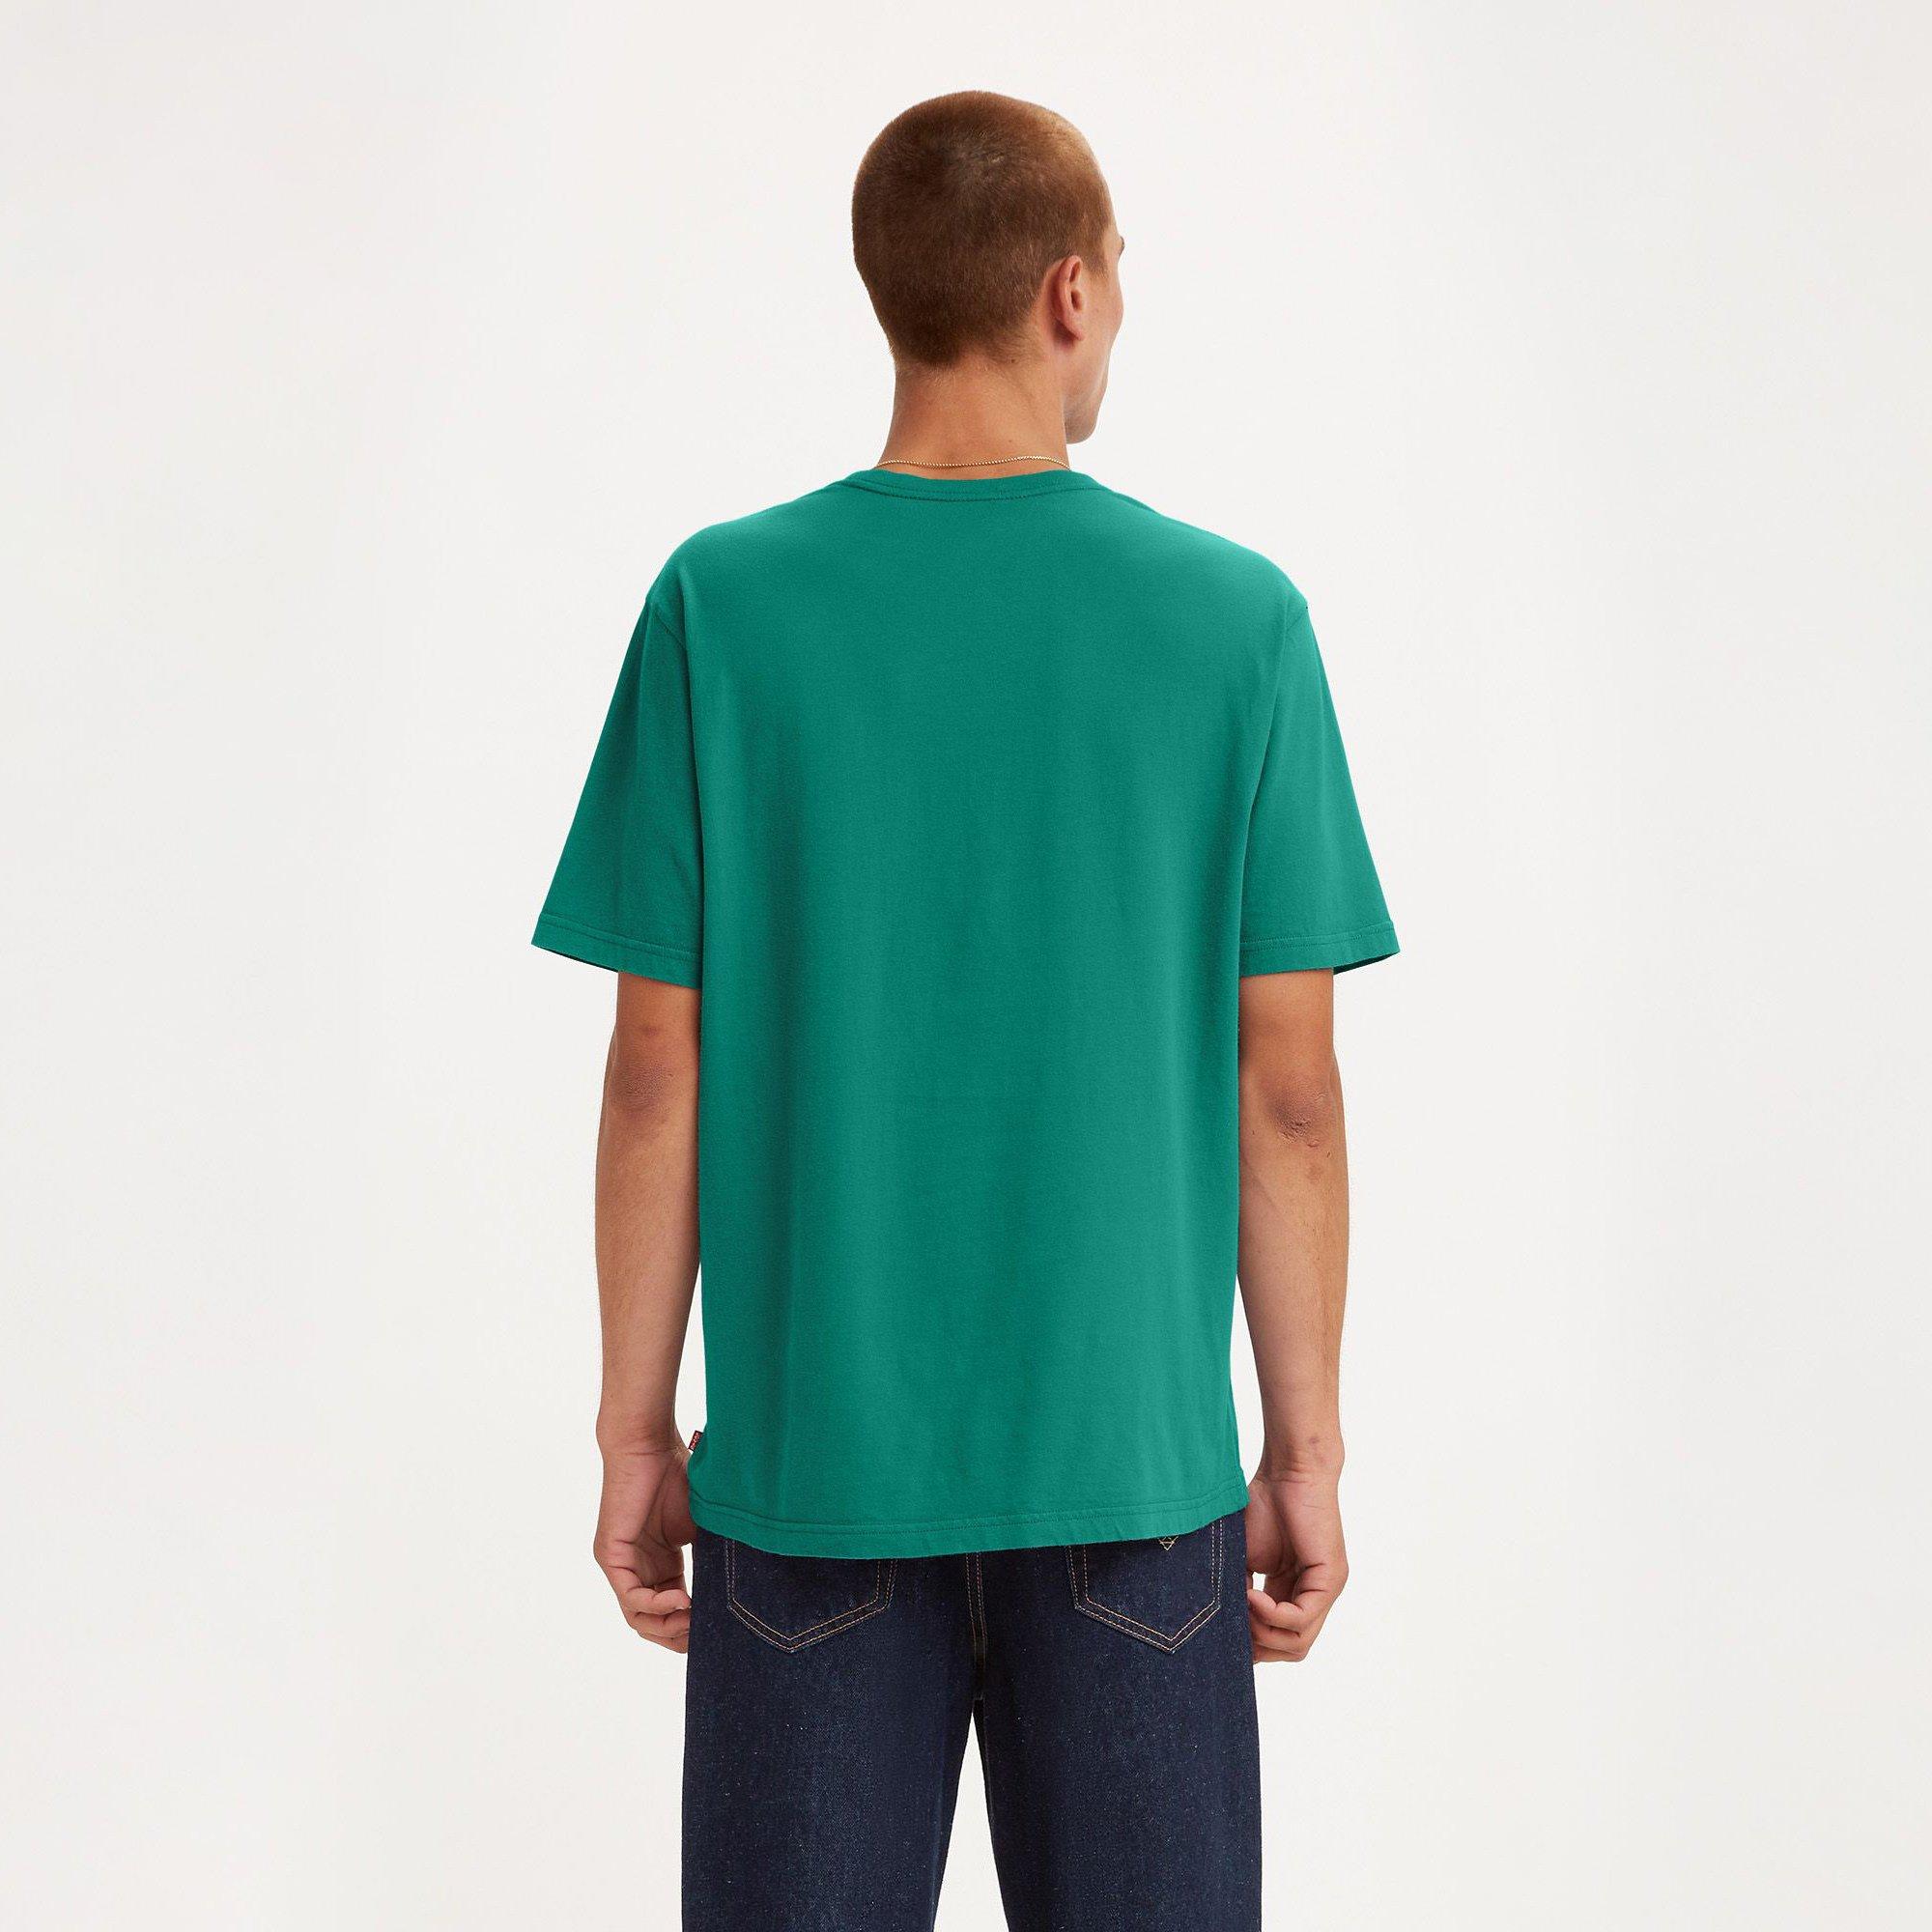 Levi's® RELAXED FIT TEE T-Shirt 